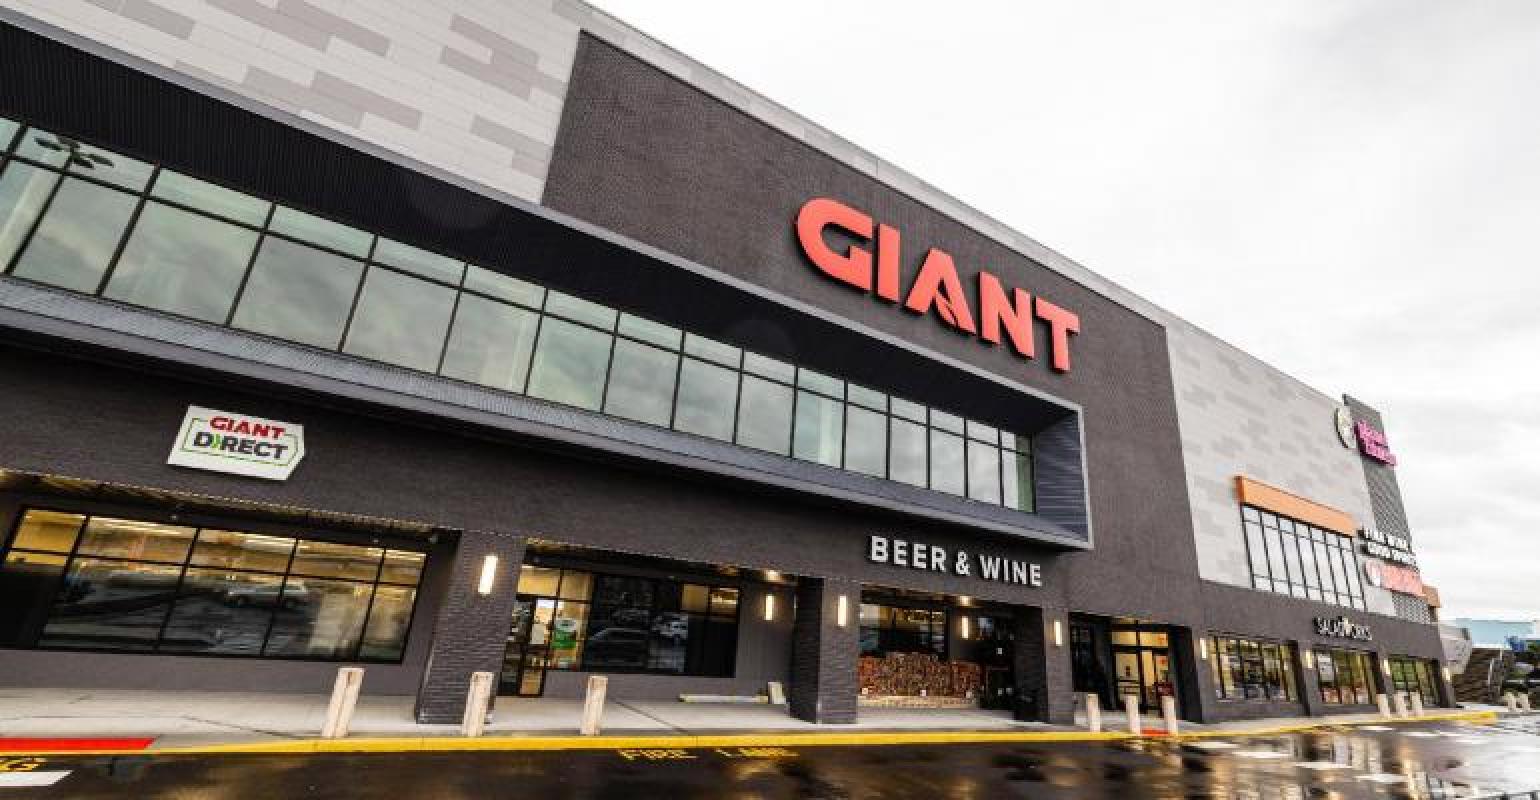 The Giant Company pushes ahead with Philadelphia expansion